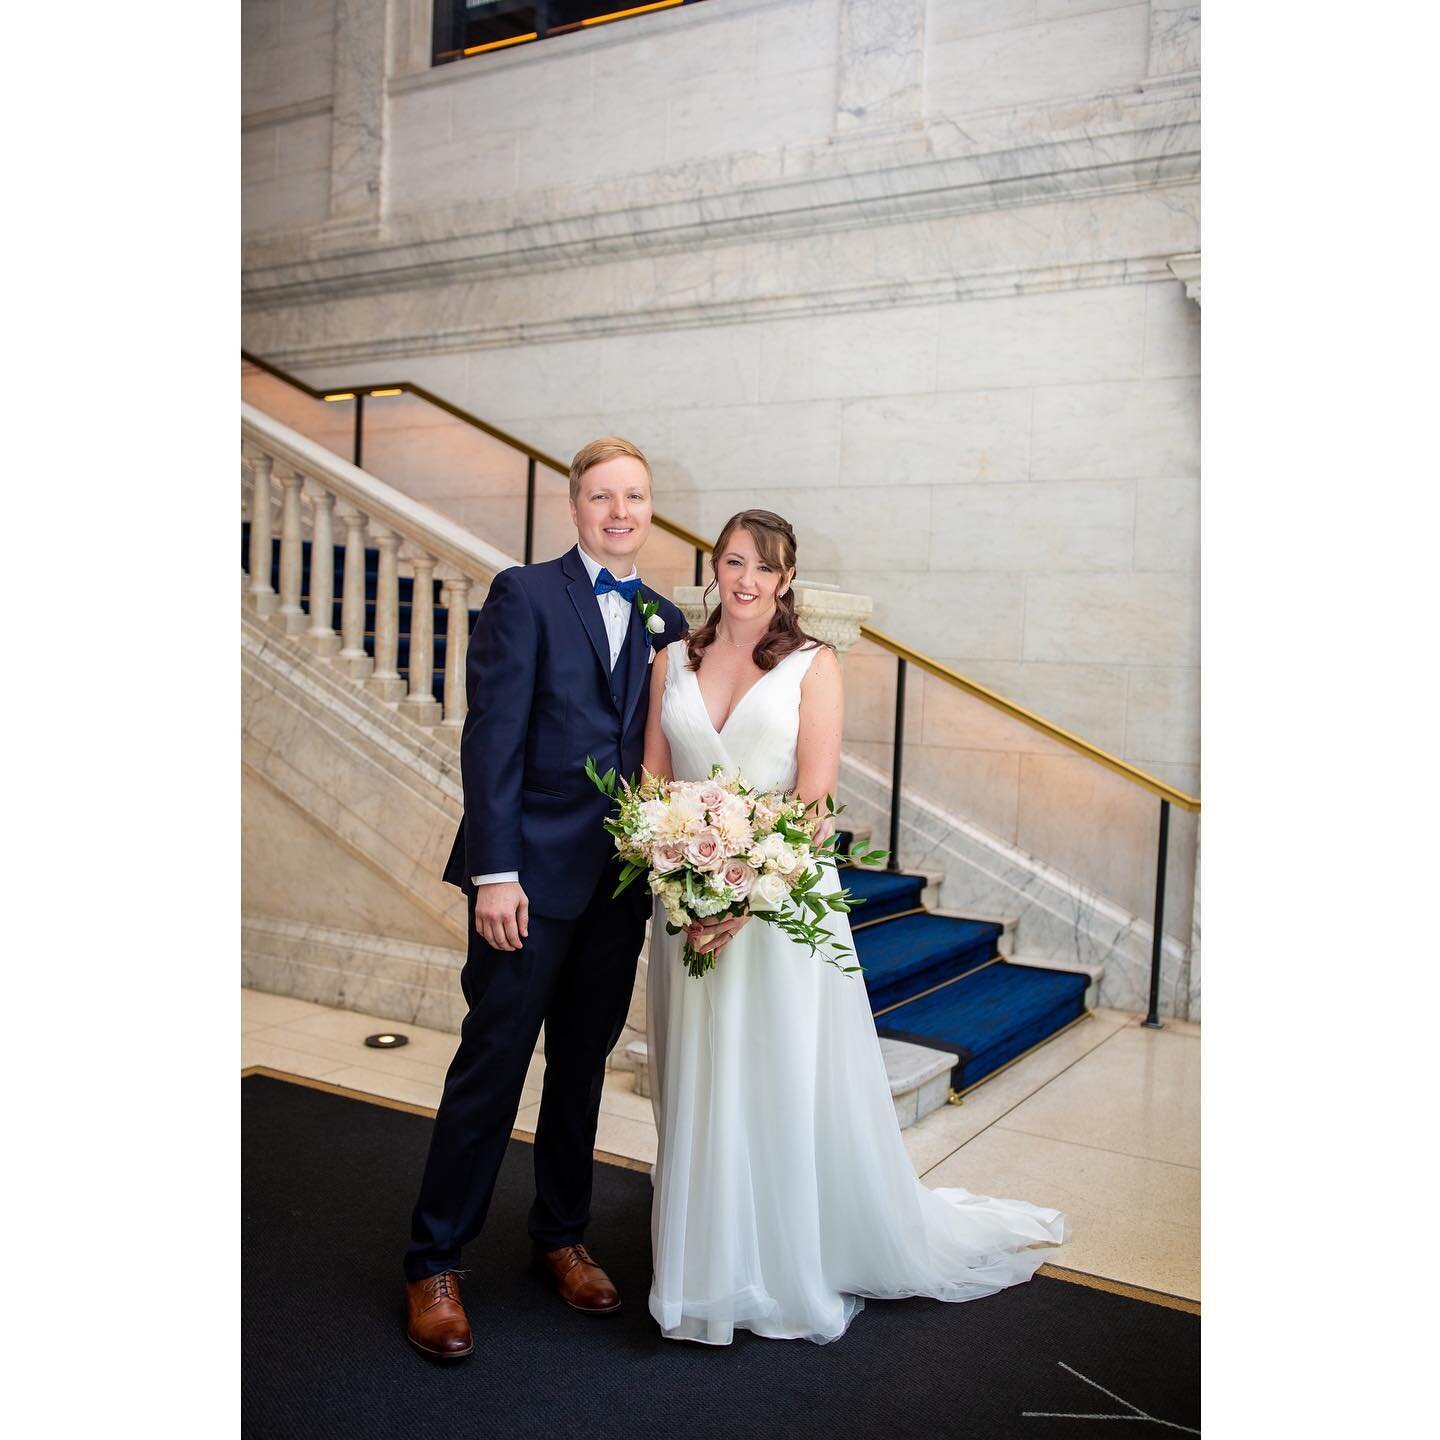 After first look shot! Evan &amp; Jill 9.7.2019 .
.
.
.
#eventspace #eventvenue #chicagoweddings #instawed #weddingplanning #chicagowedding #chicagoluxurywedding #chicagobride #chicagogroom #luxuryweddings #tietheknot #chicagoluxury planner #shesaidy